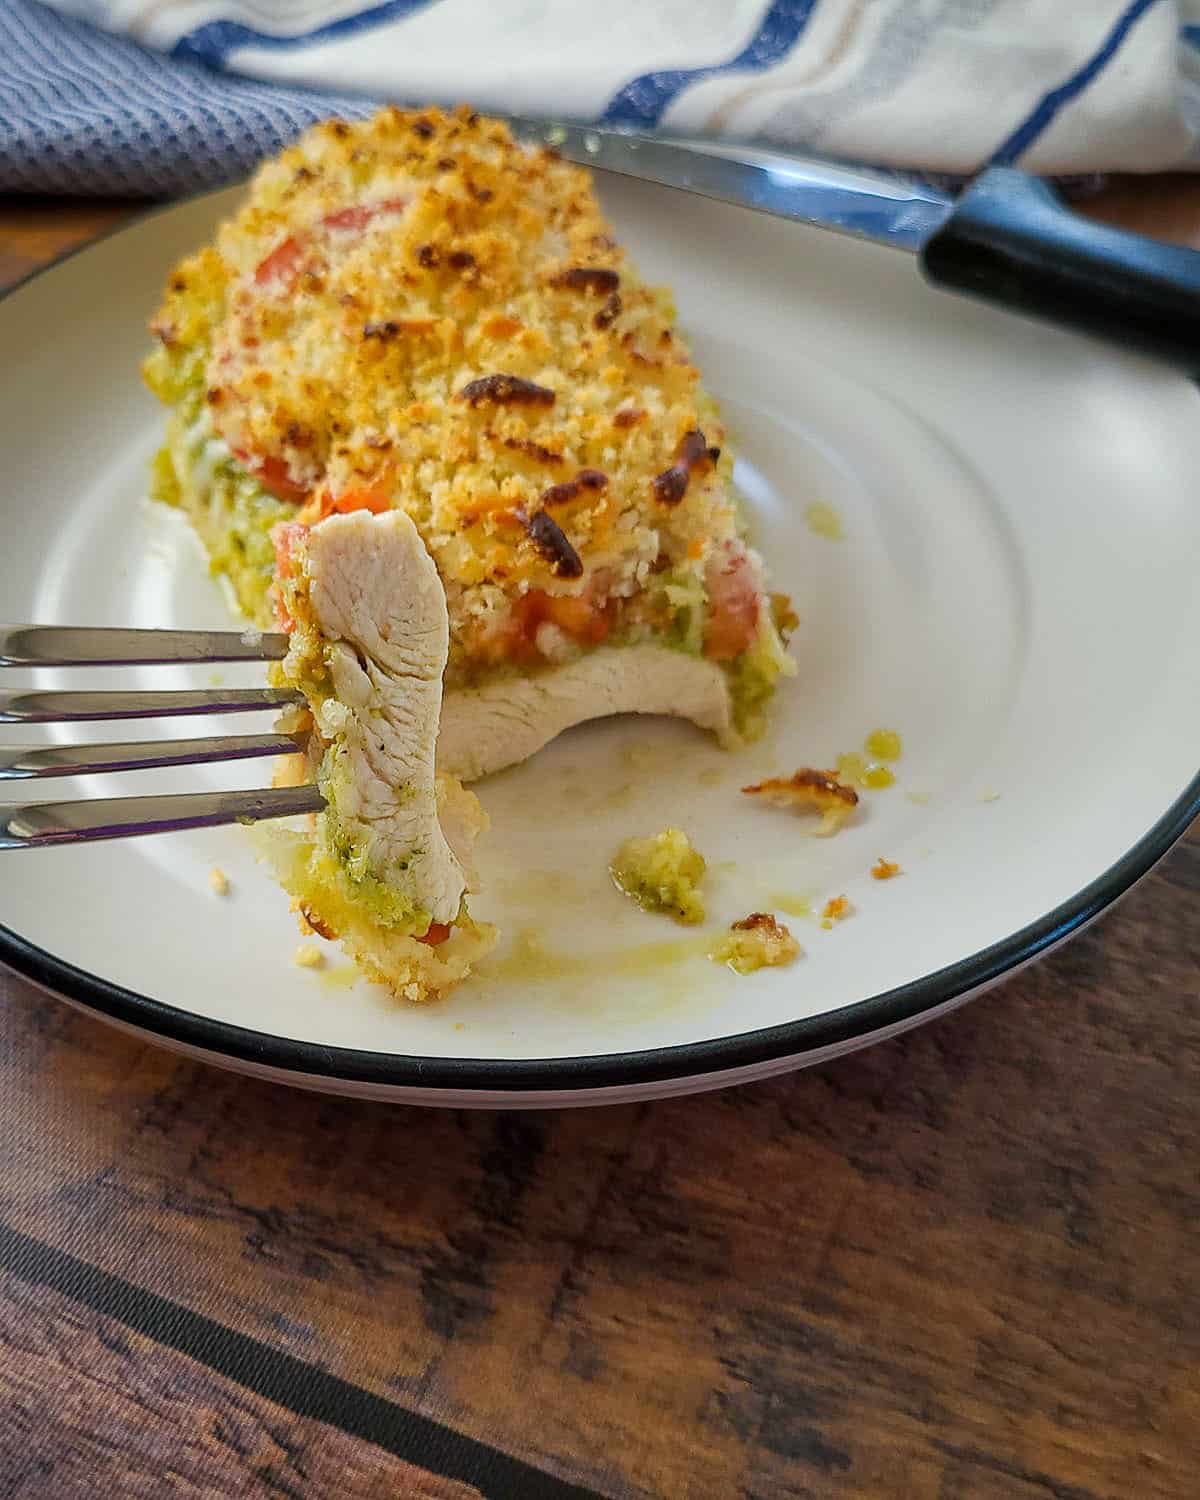 baked chicken breast with pesto, tomato and cheese on a plate